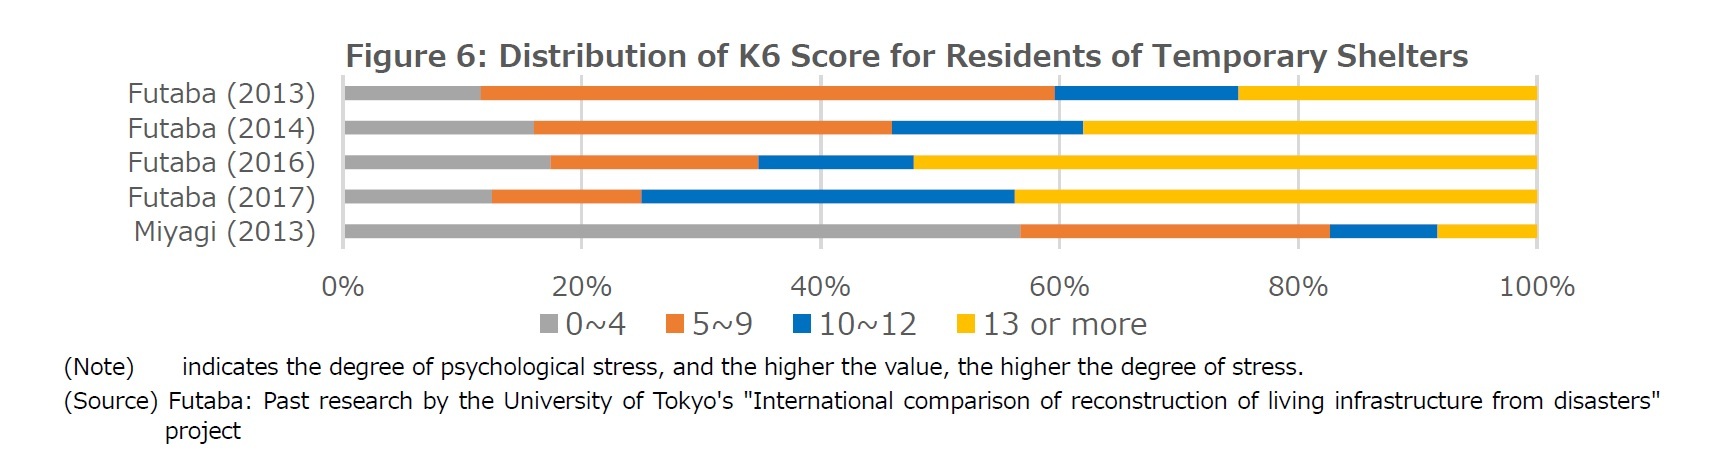 Figure 6: Distribution of K6 Score for Residents of Temporary Shelters